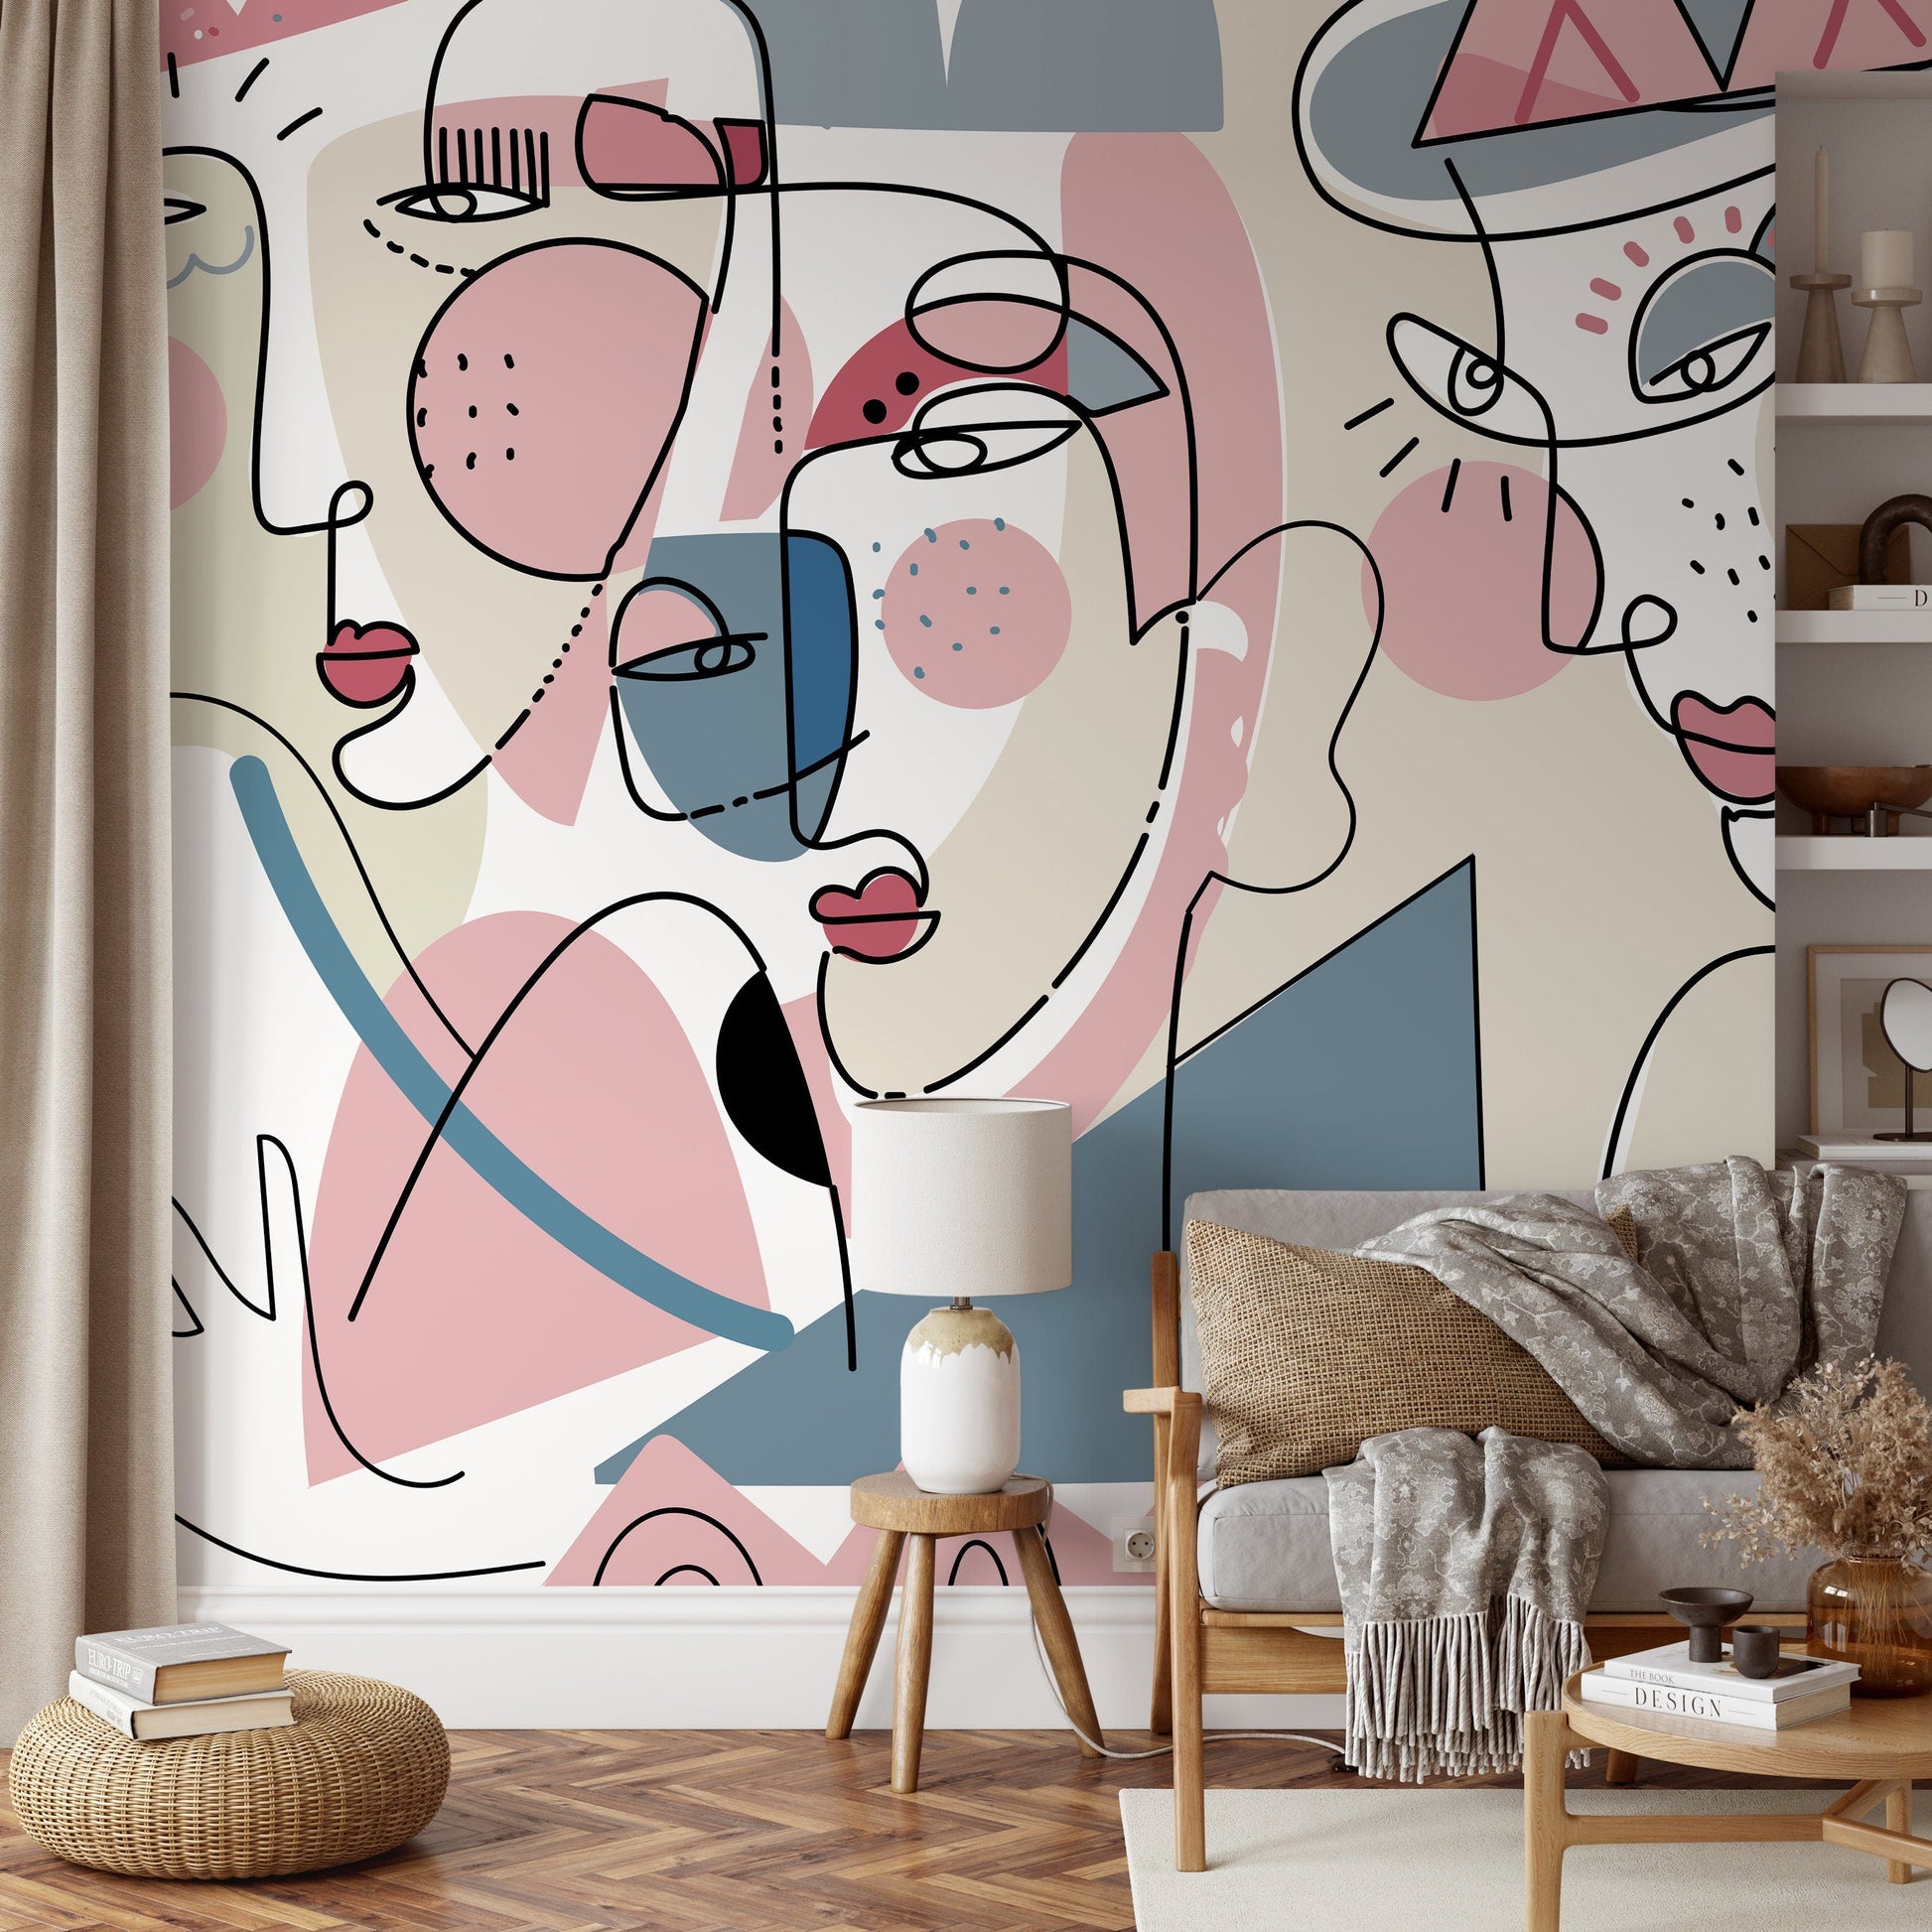 Surreal Abstract Mural Line Art Wallpaper Peel and Stick Wallpaper Home Decor - D603